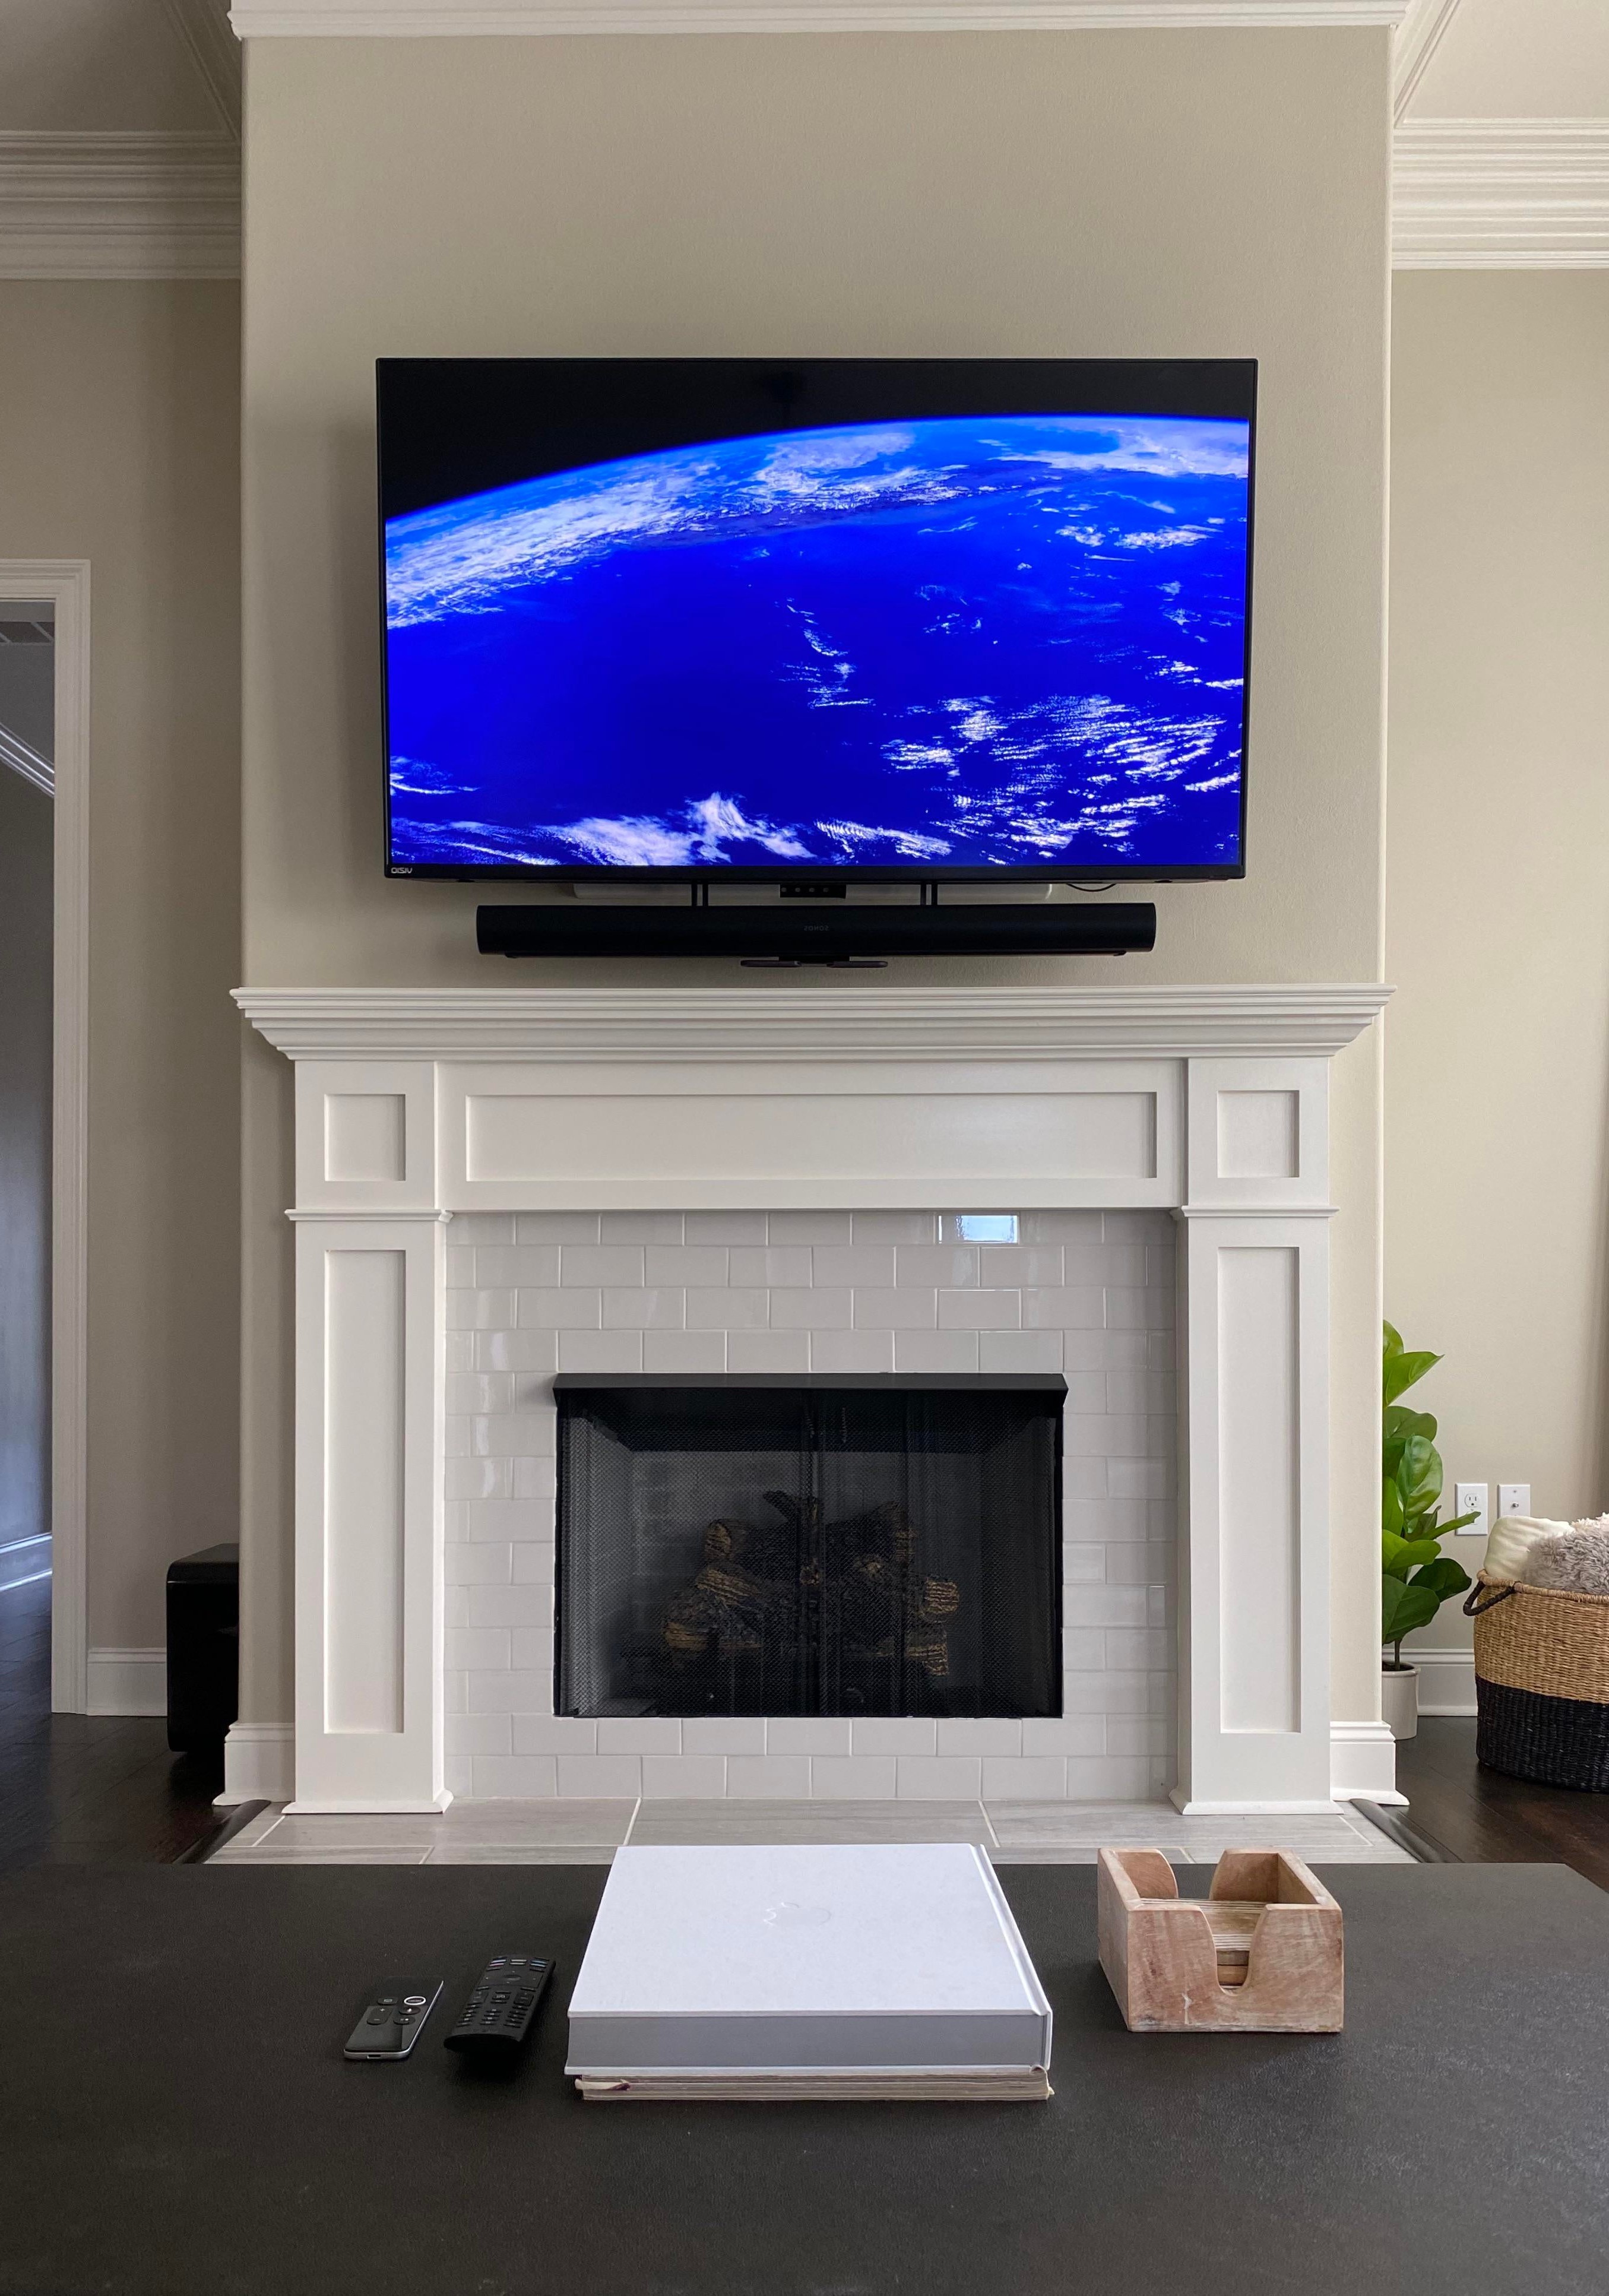 How to Protect Tv from Fireplace Heat 